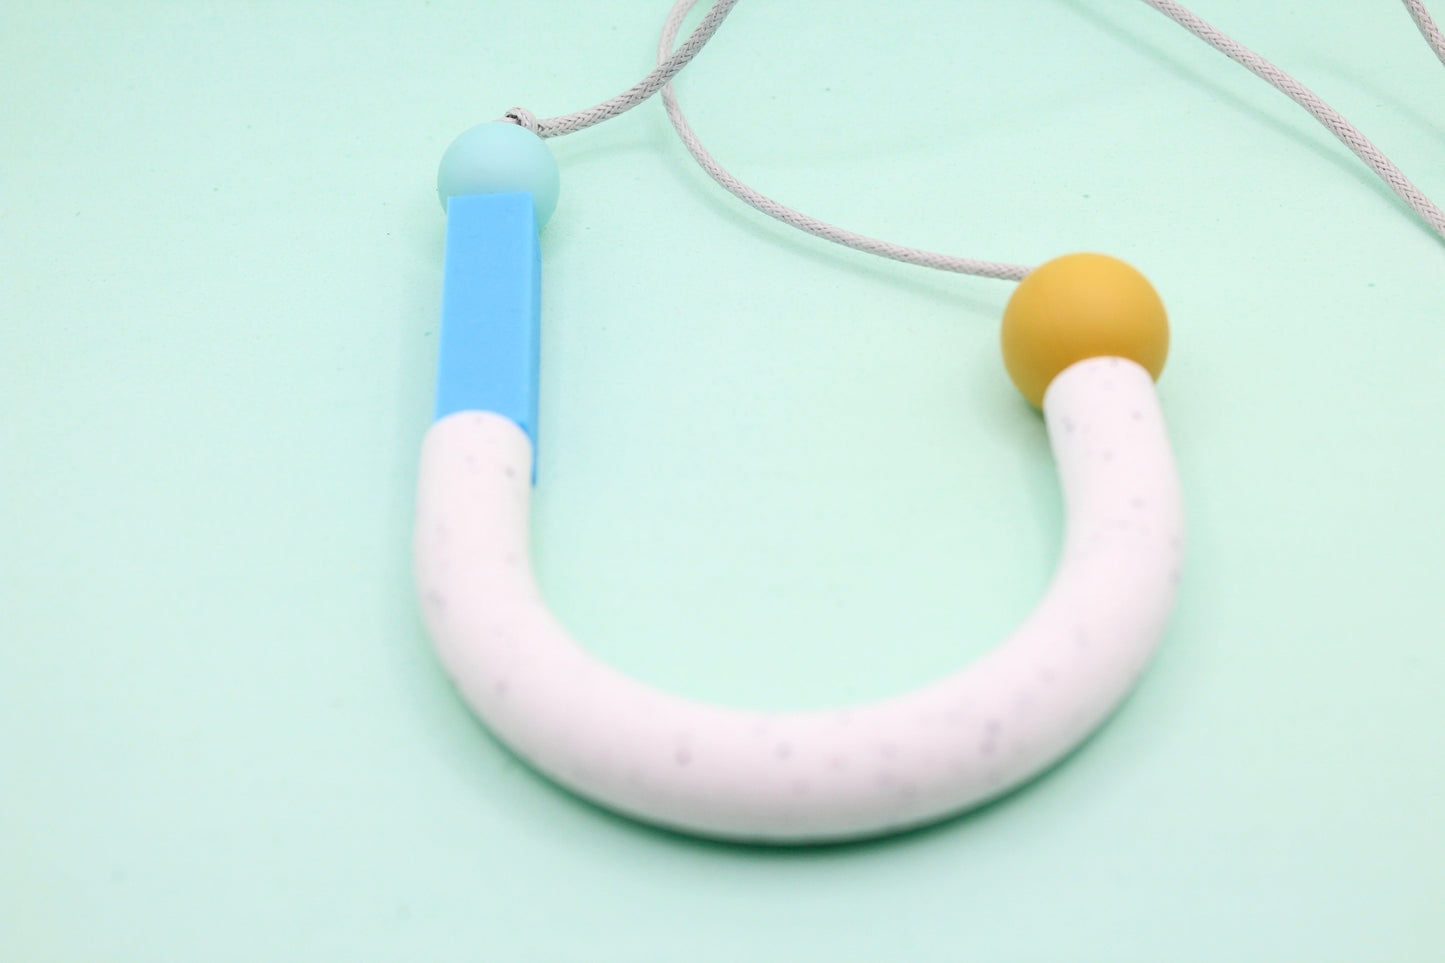 U-shaped silicone necklace for sensory and teething use worn by adults.